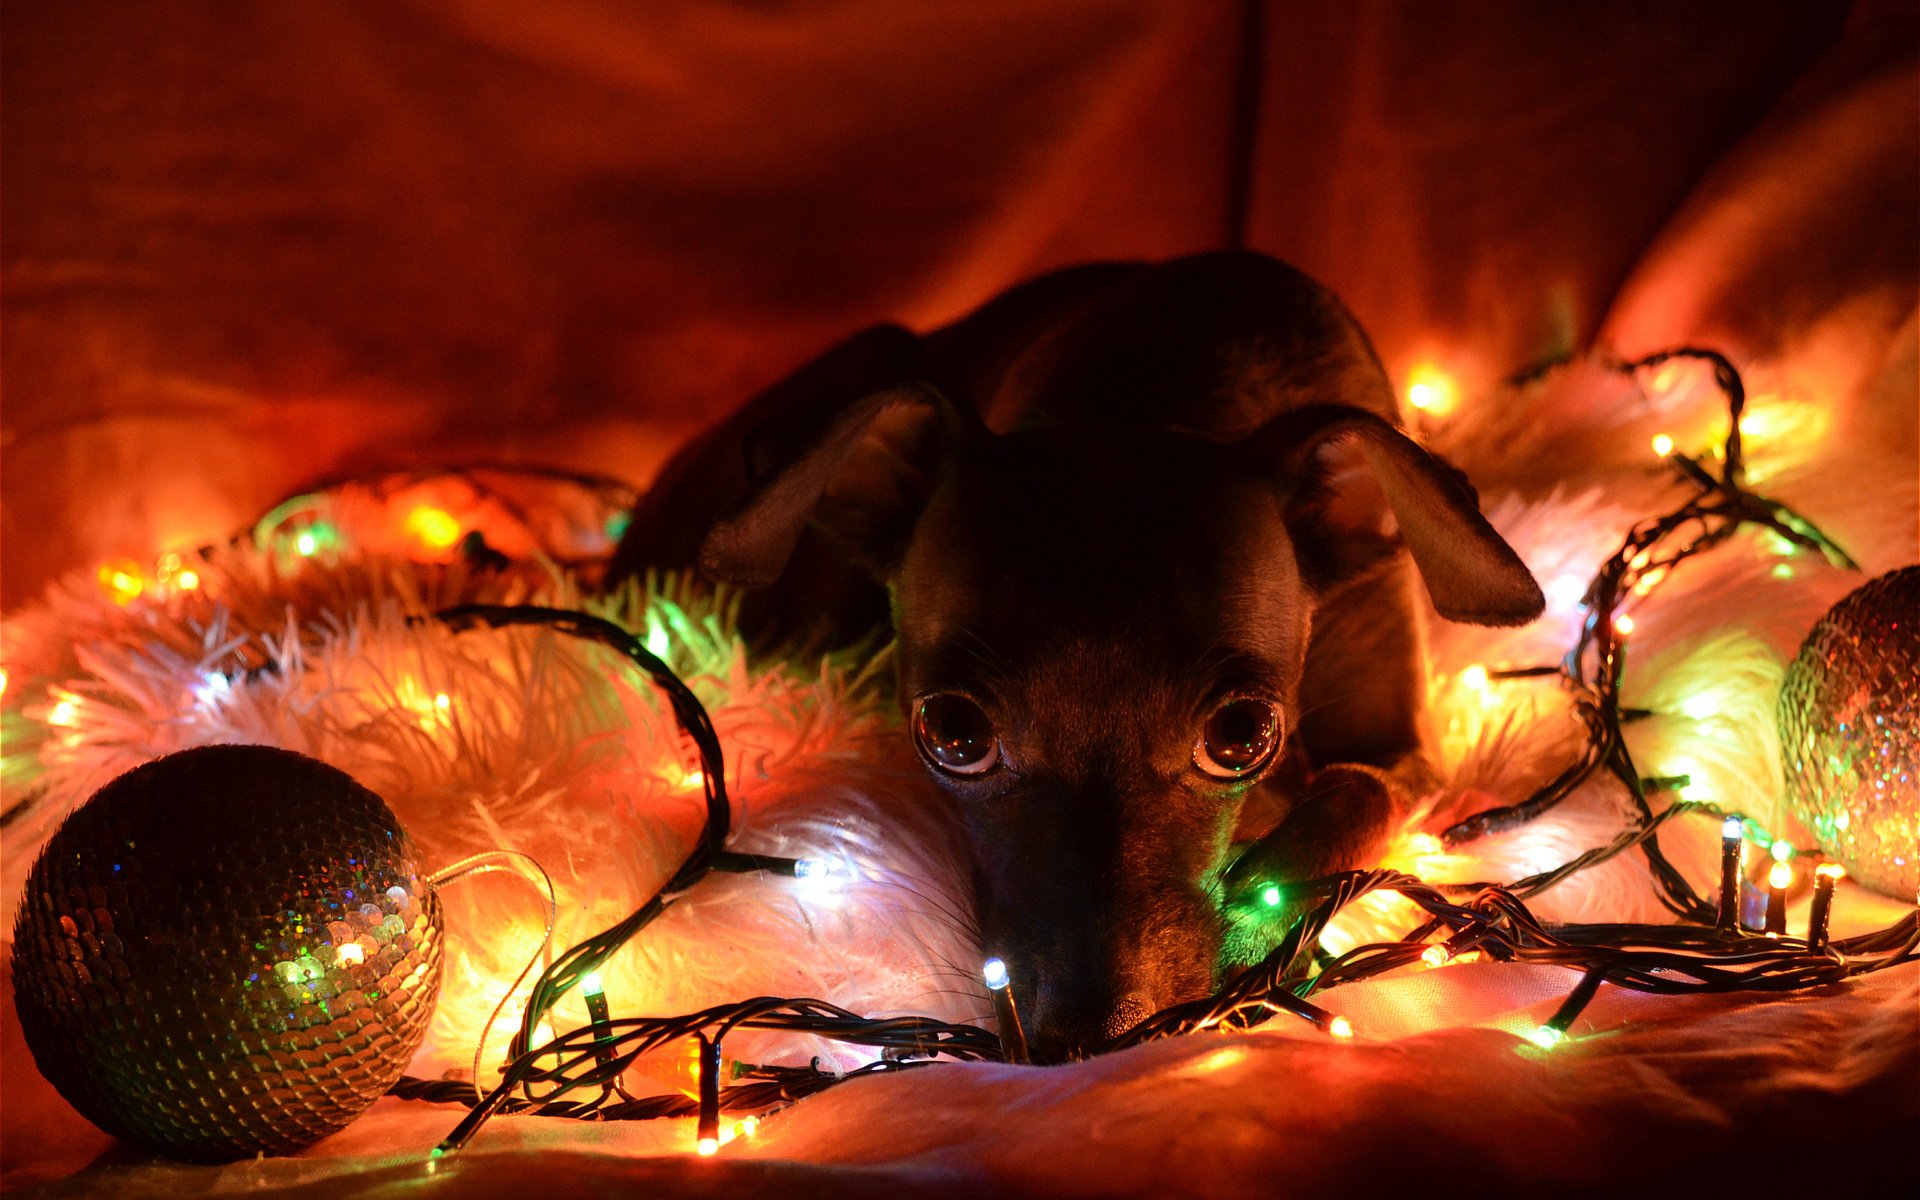 Christmas Dogs Wallpapers High Quality Download Free